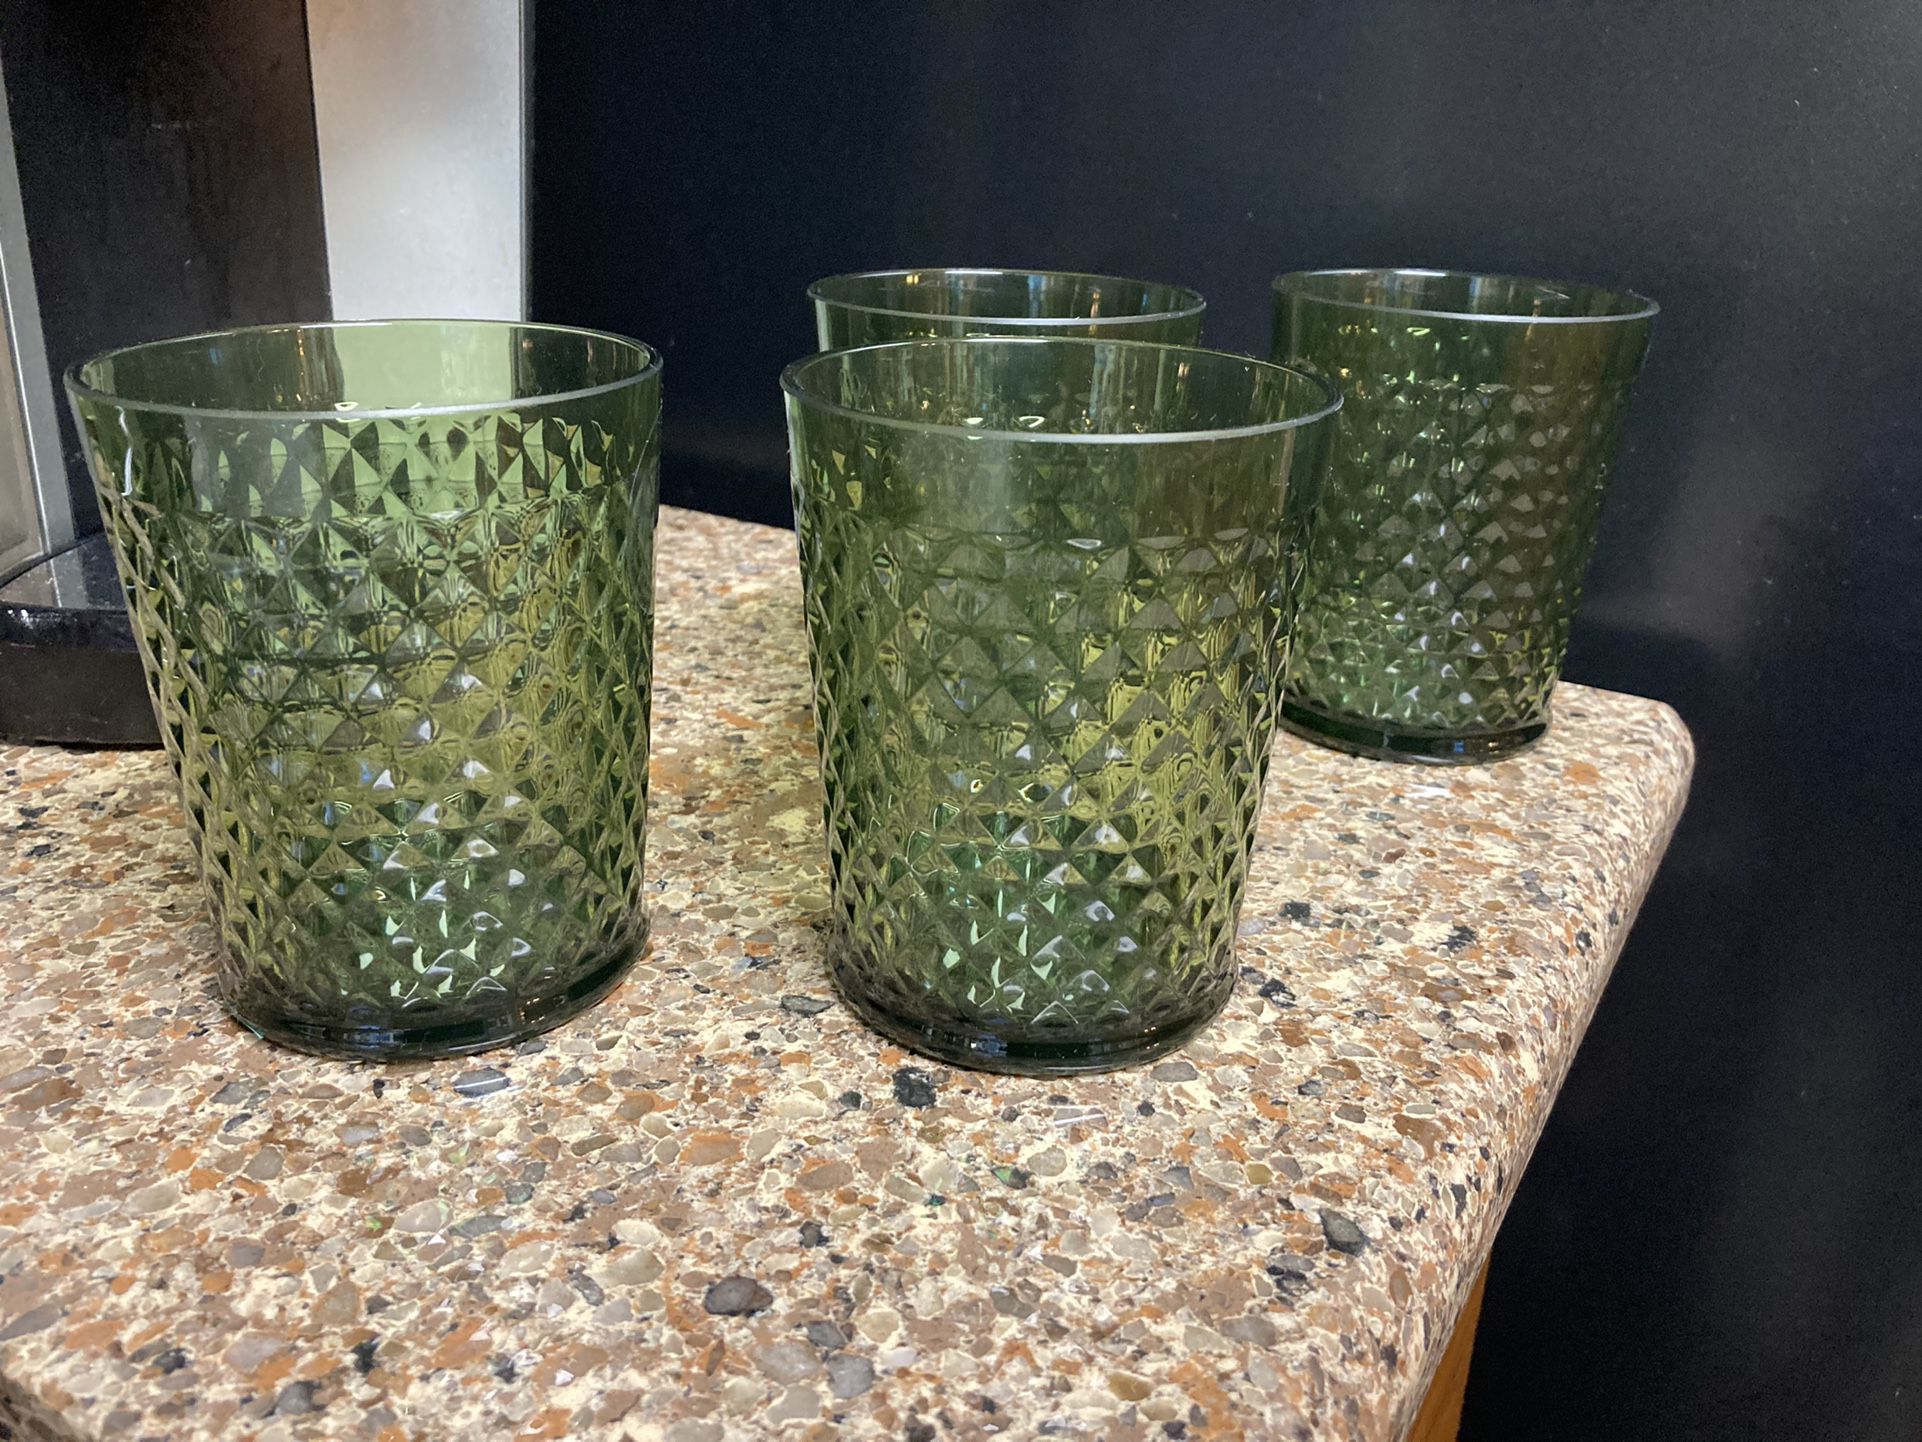 New with tags set of 4 deep green plastic cups great for entertaining or hot tub 